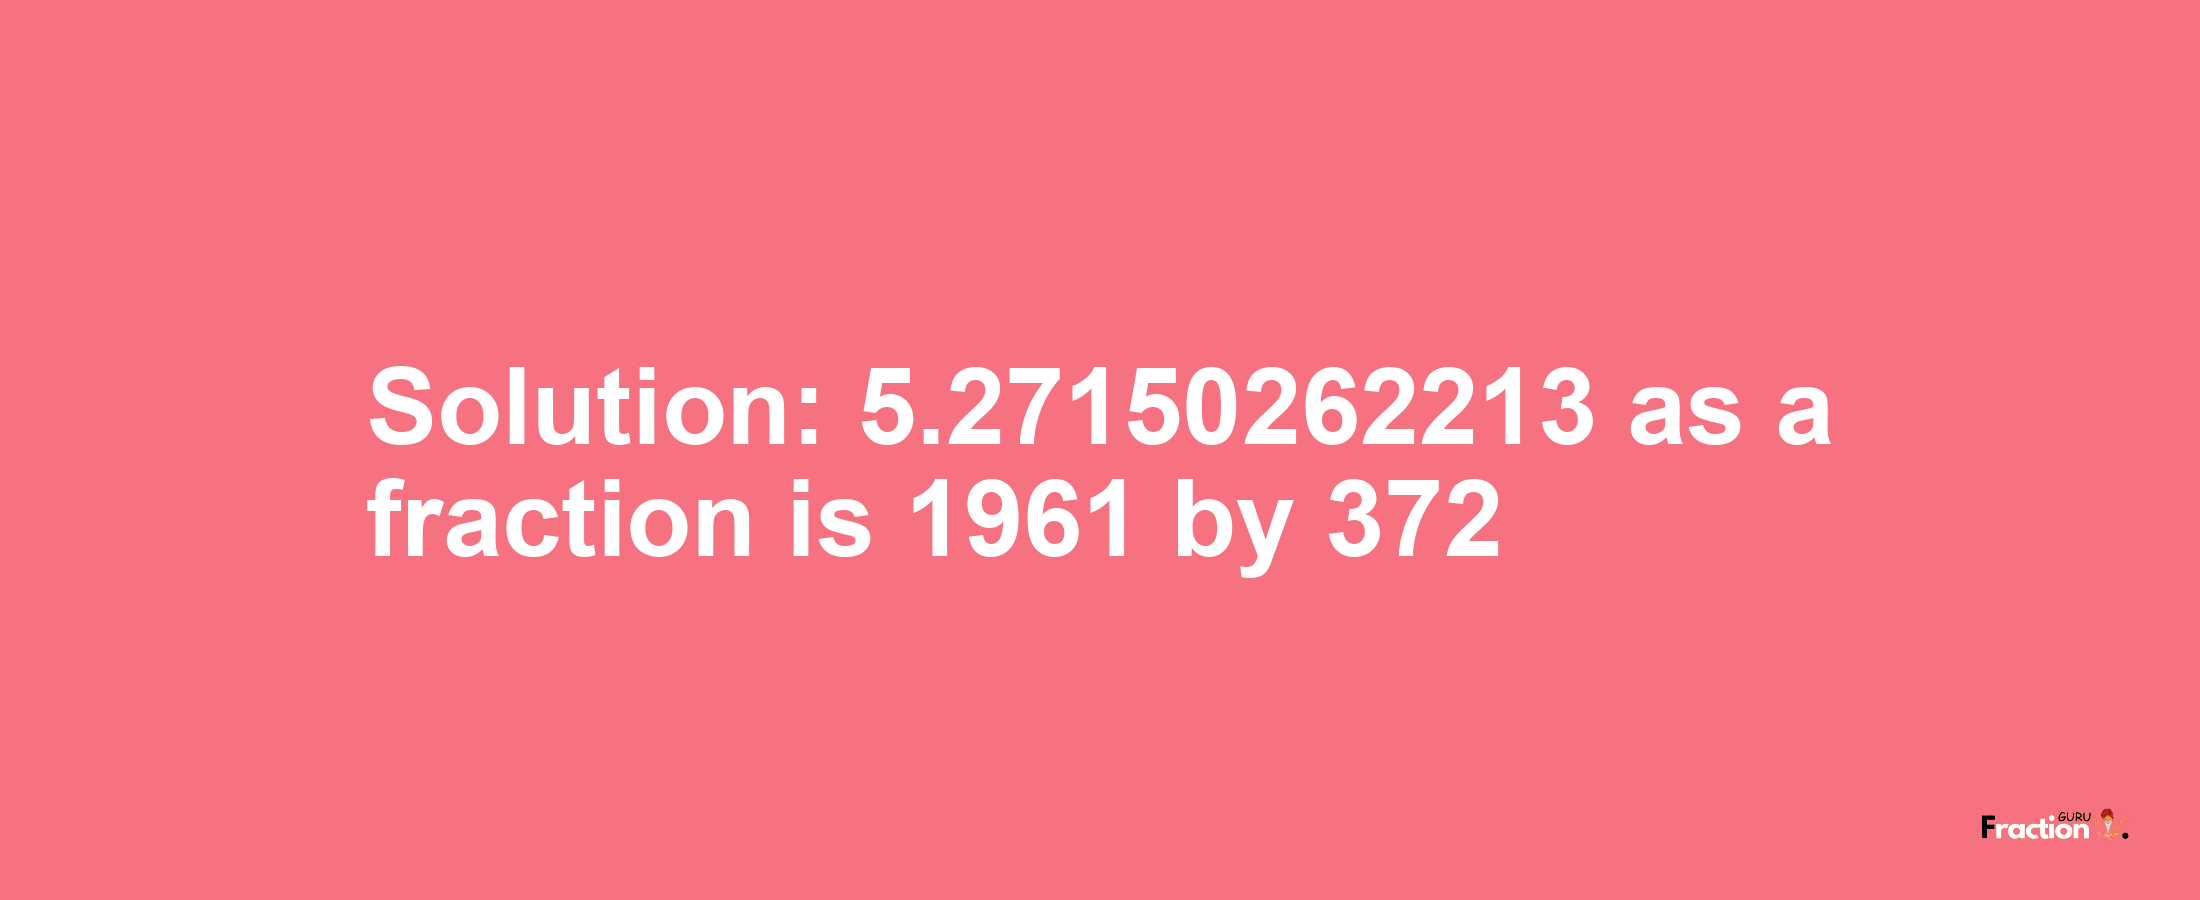 Solution:5.27150262213 as a fraction is 1961/372